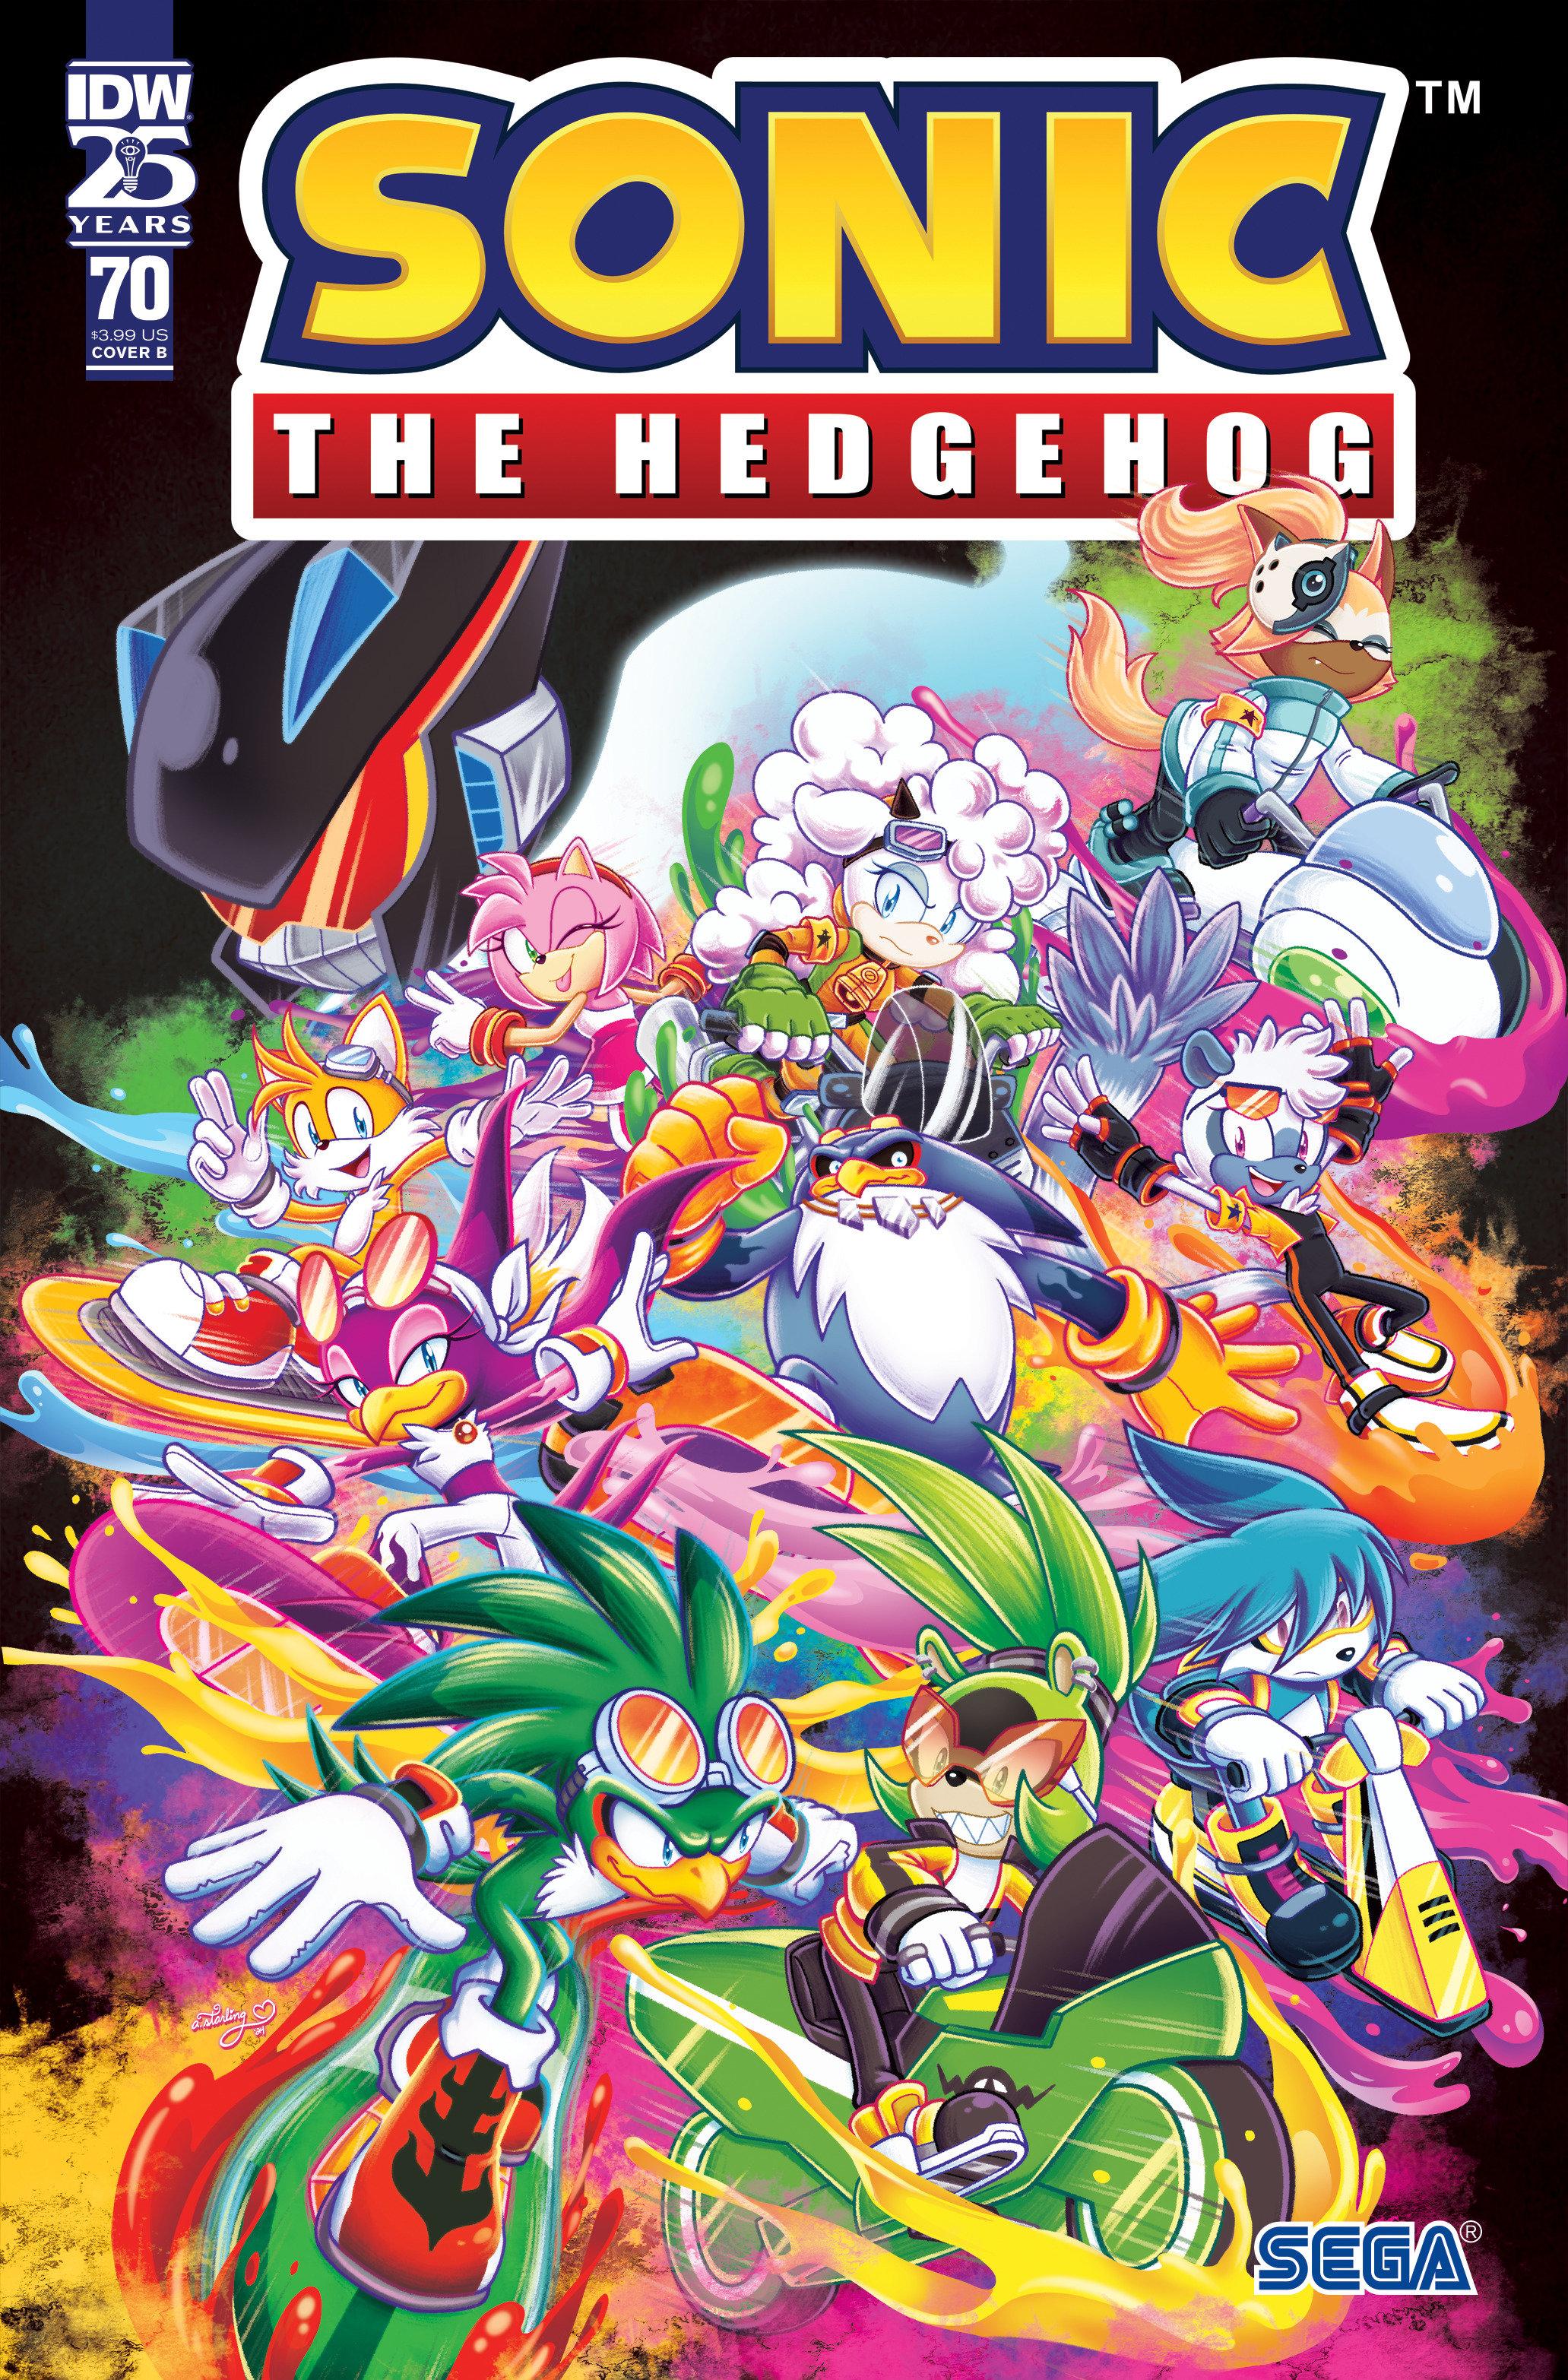 Sonic the Hedgehog #70 Cover B Starling